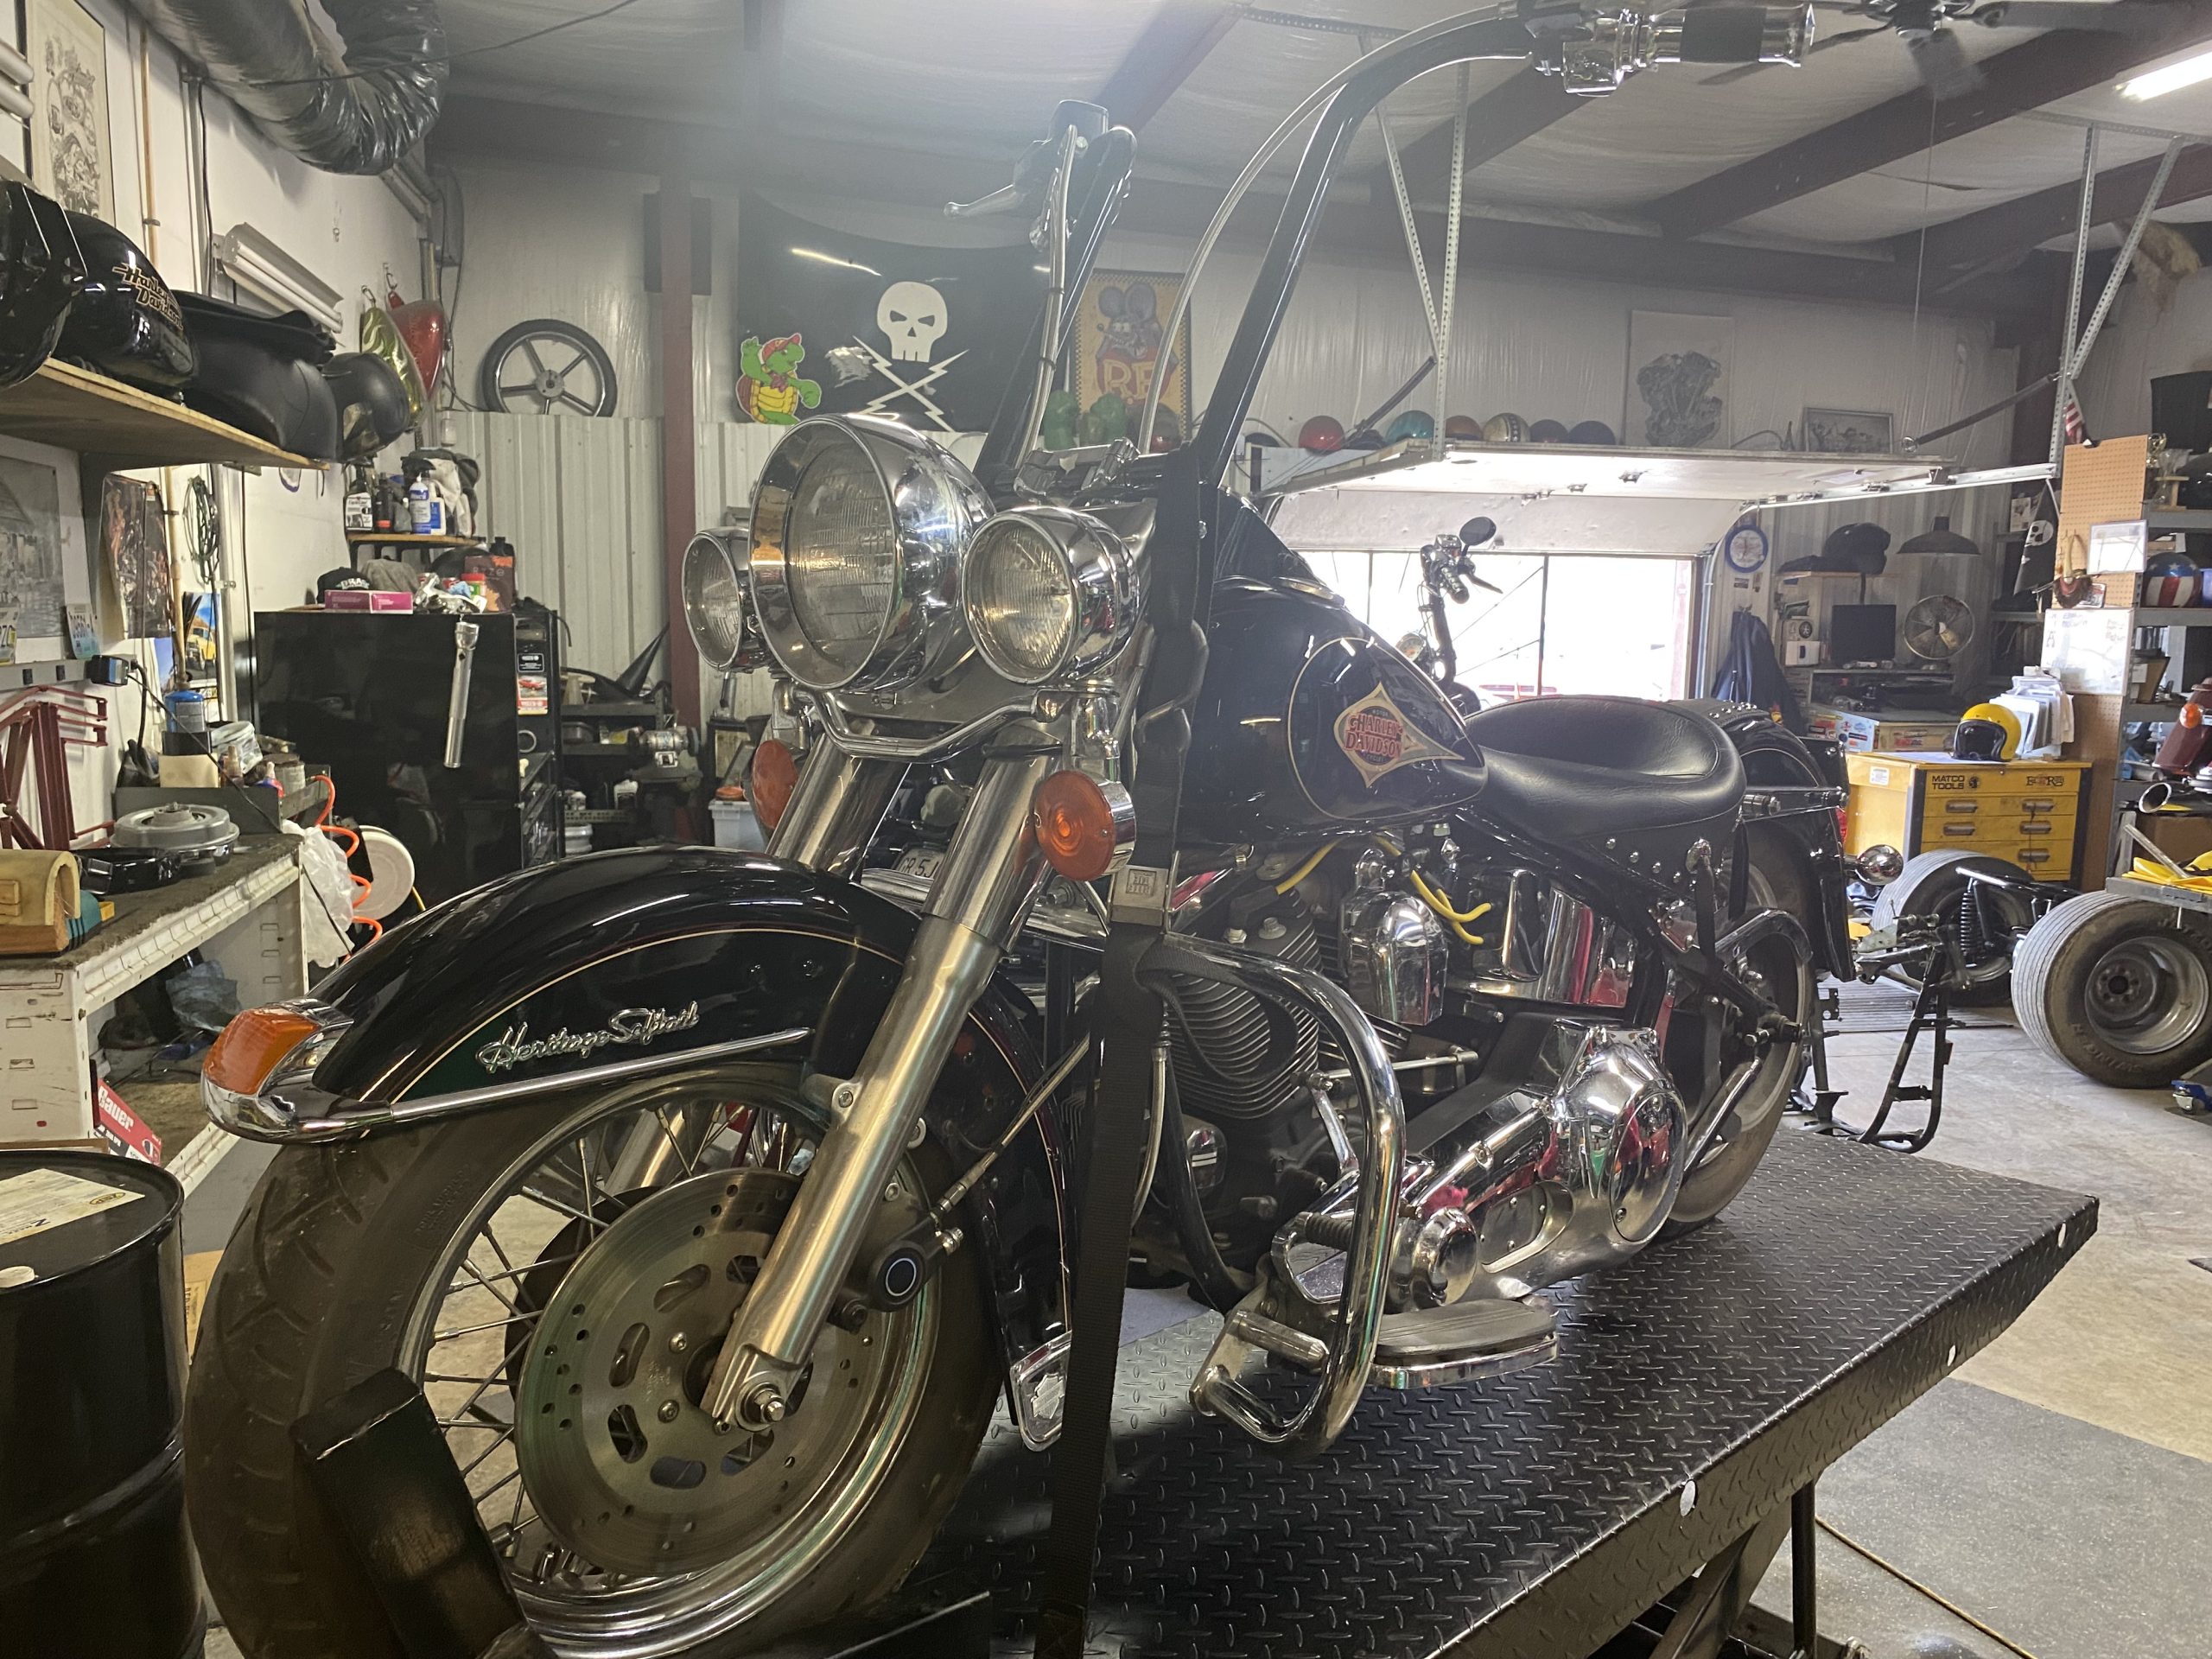 FLSTC Heritage Softail, 1997 FLSTC Heritage Softail Project Bike for Sale &#8211; Only $3,500!, Knobtown Cycle